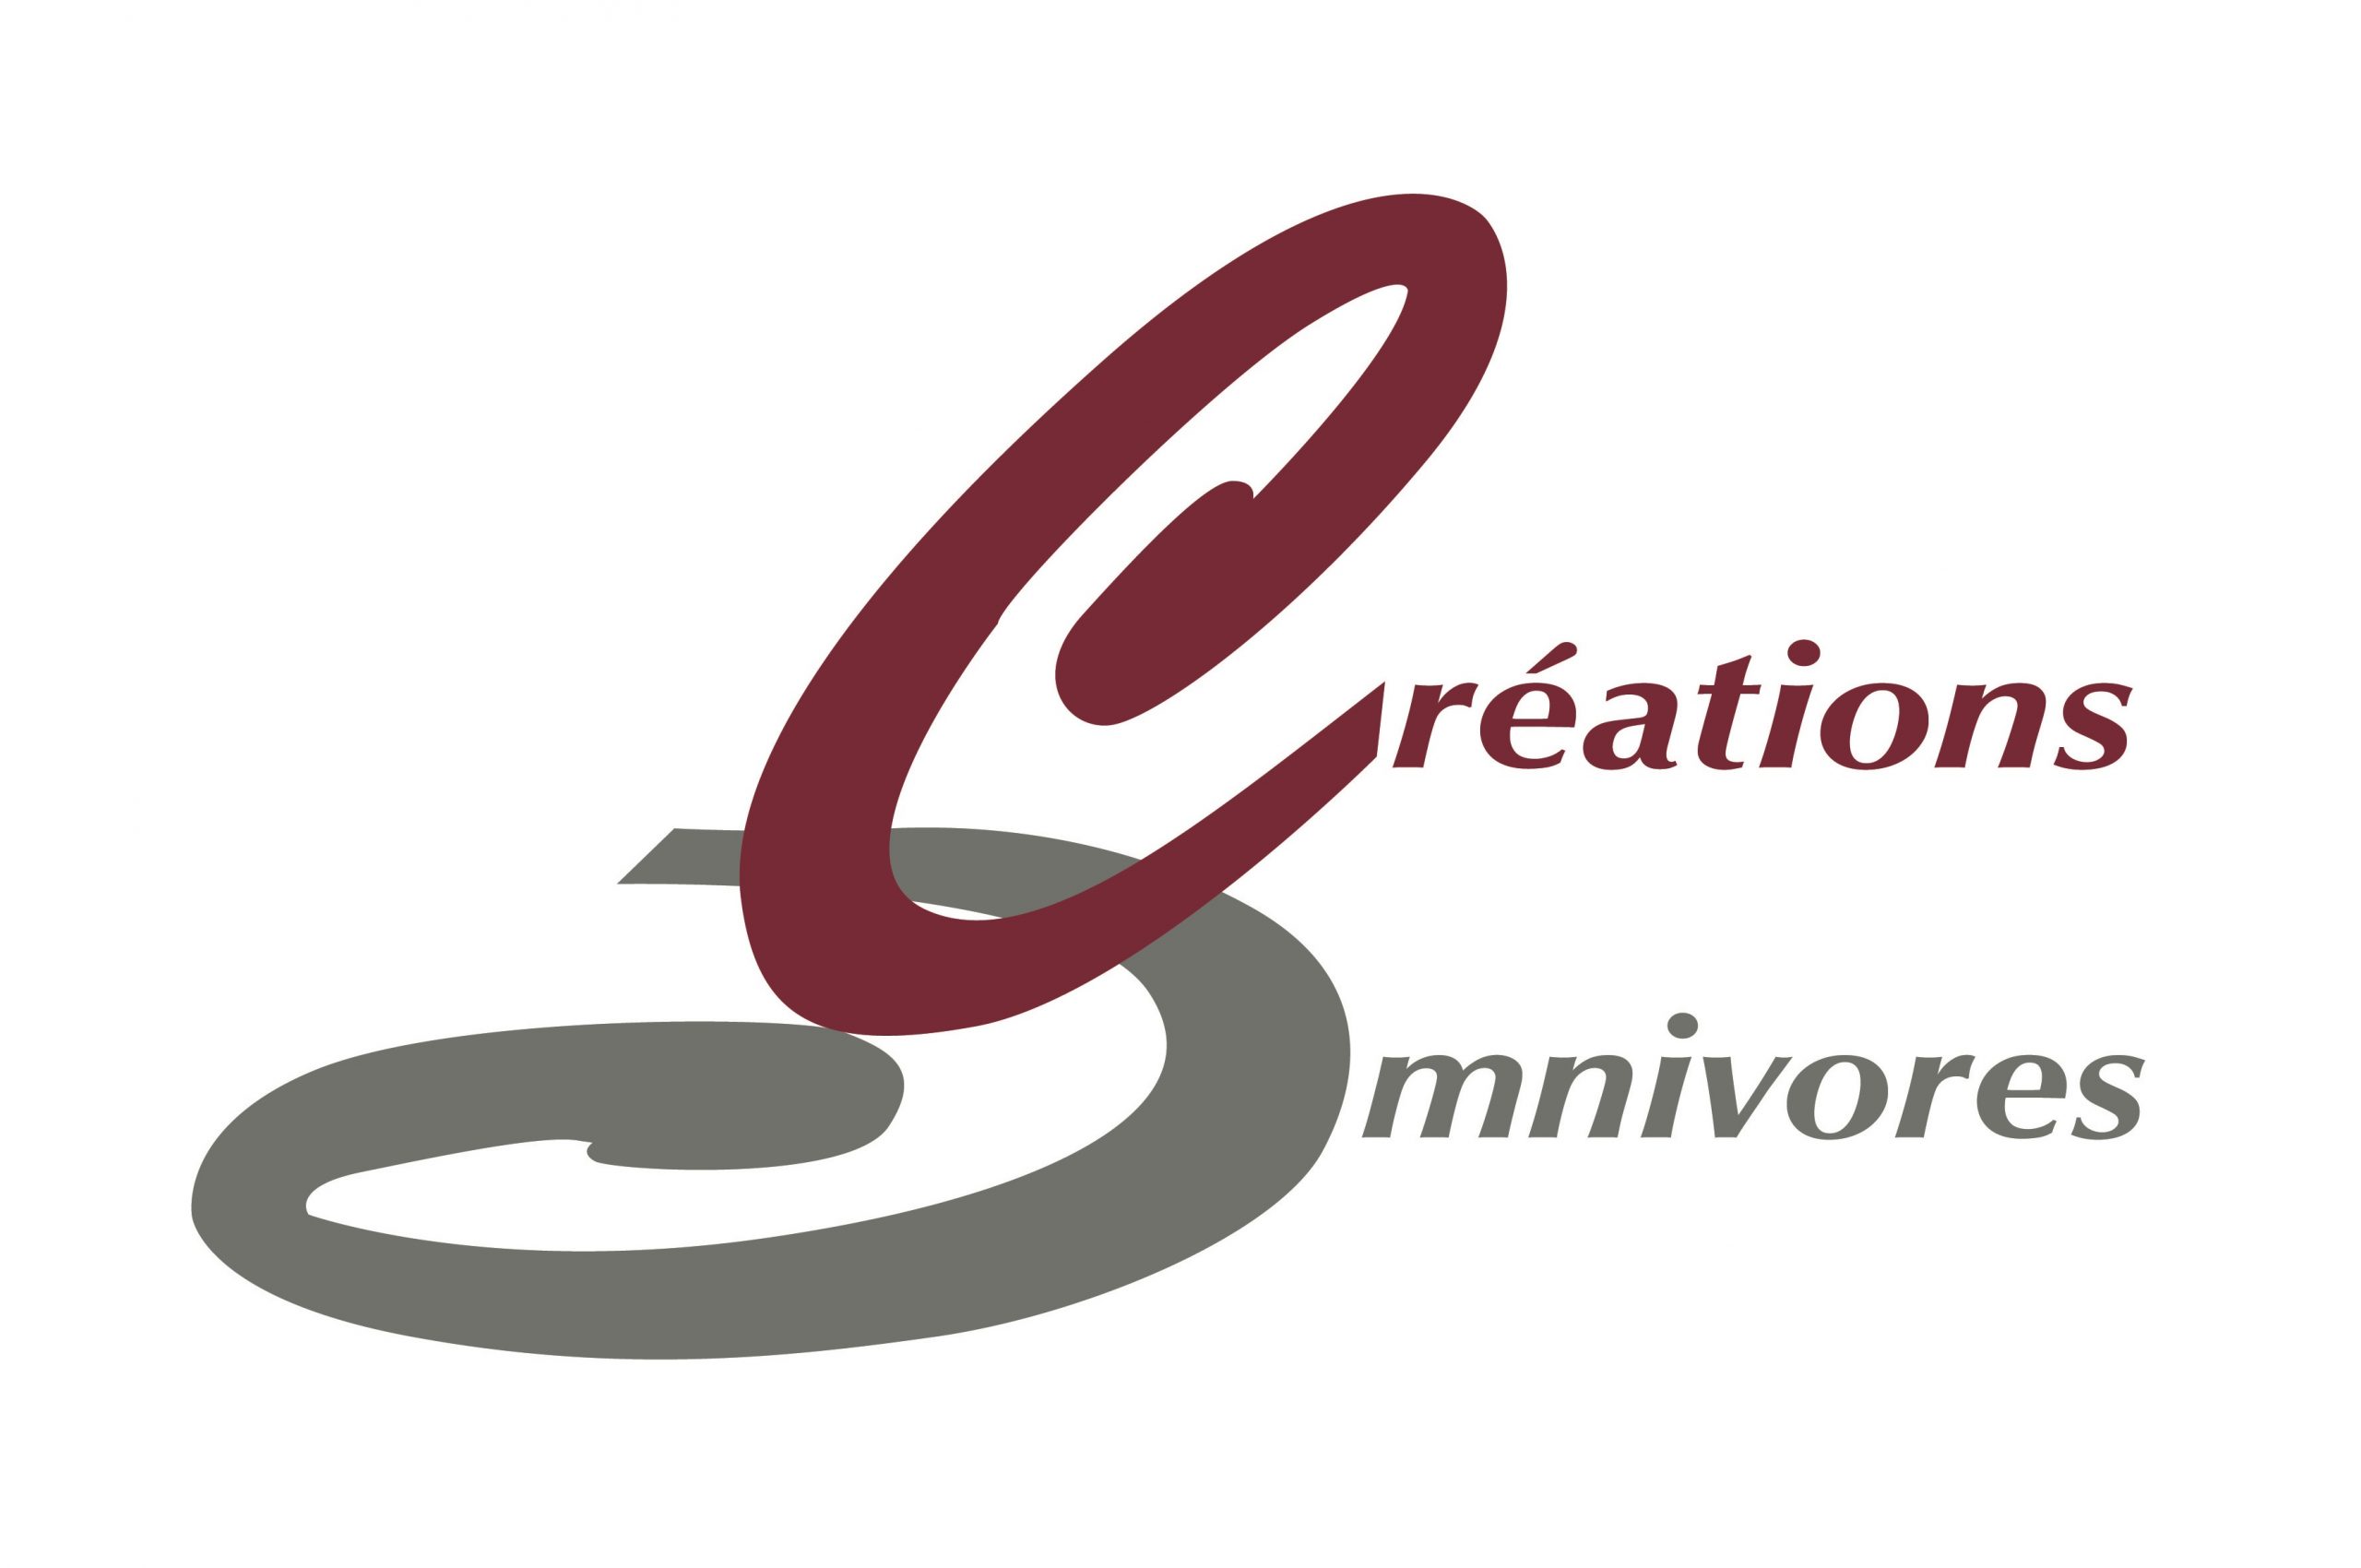 Créations omnivores